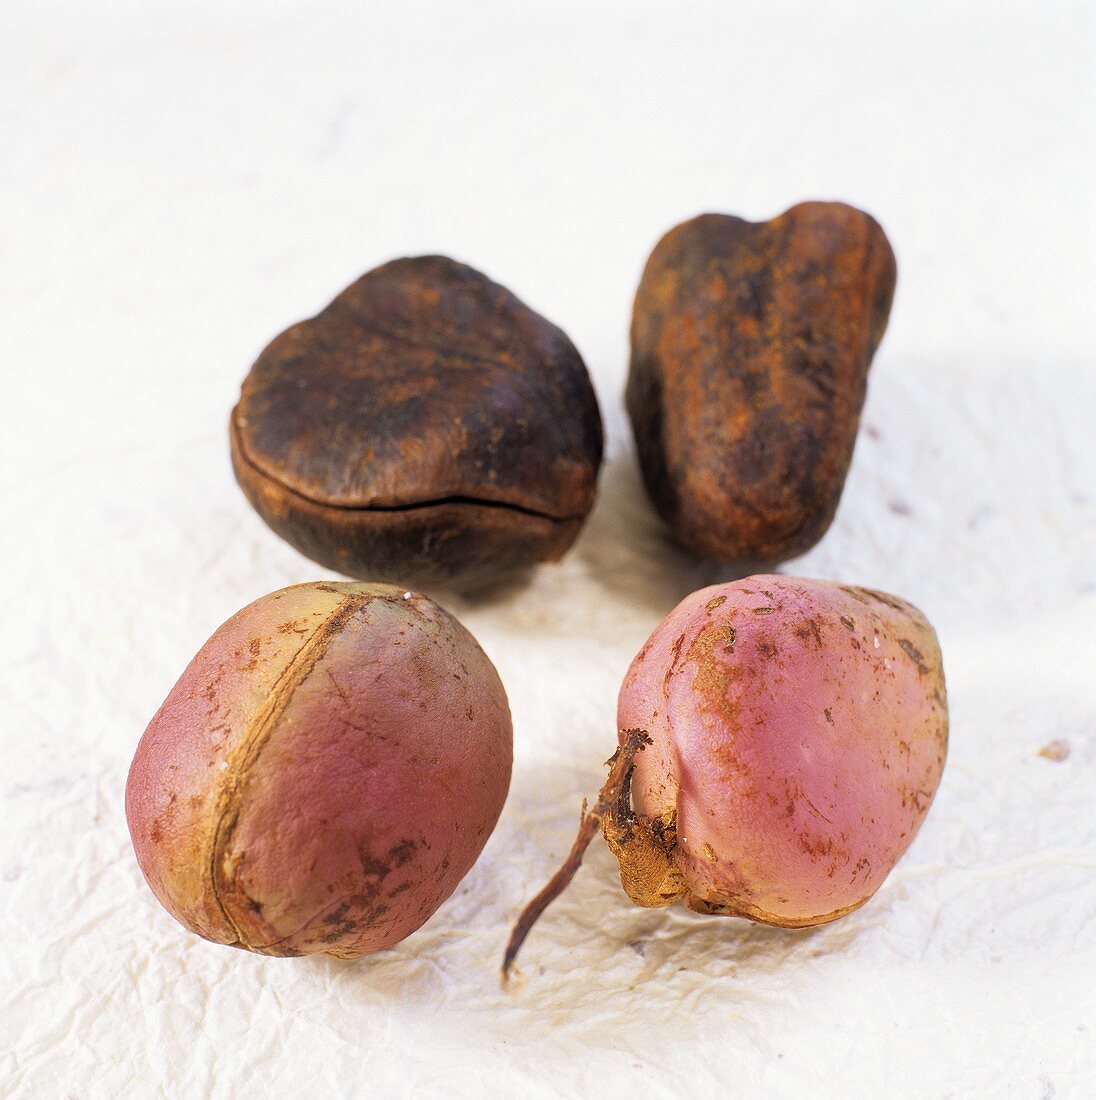 Noix de Cola (Cola nut) from Martinique, fresh and dried